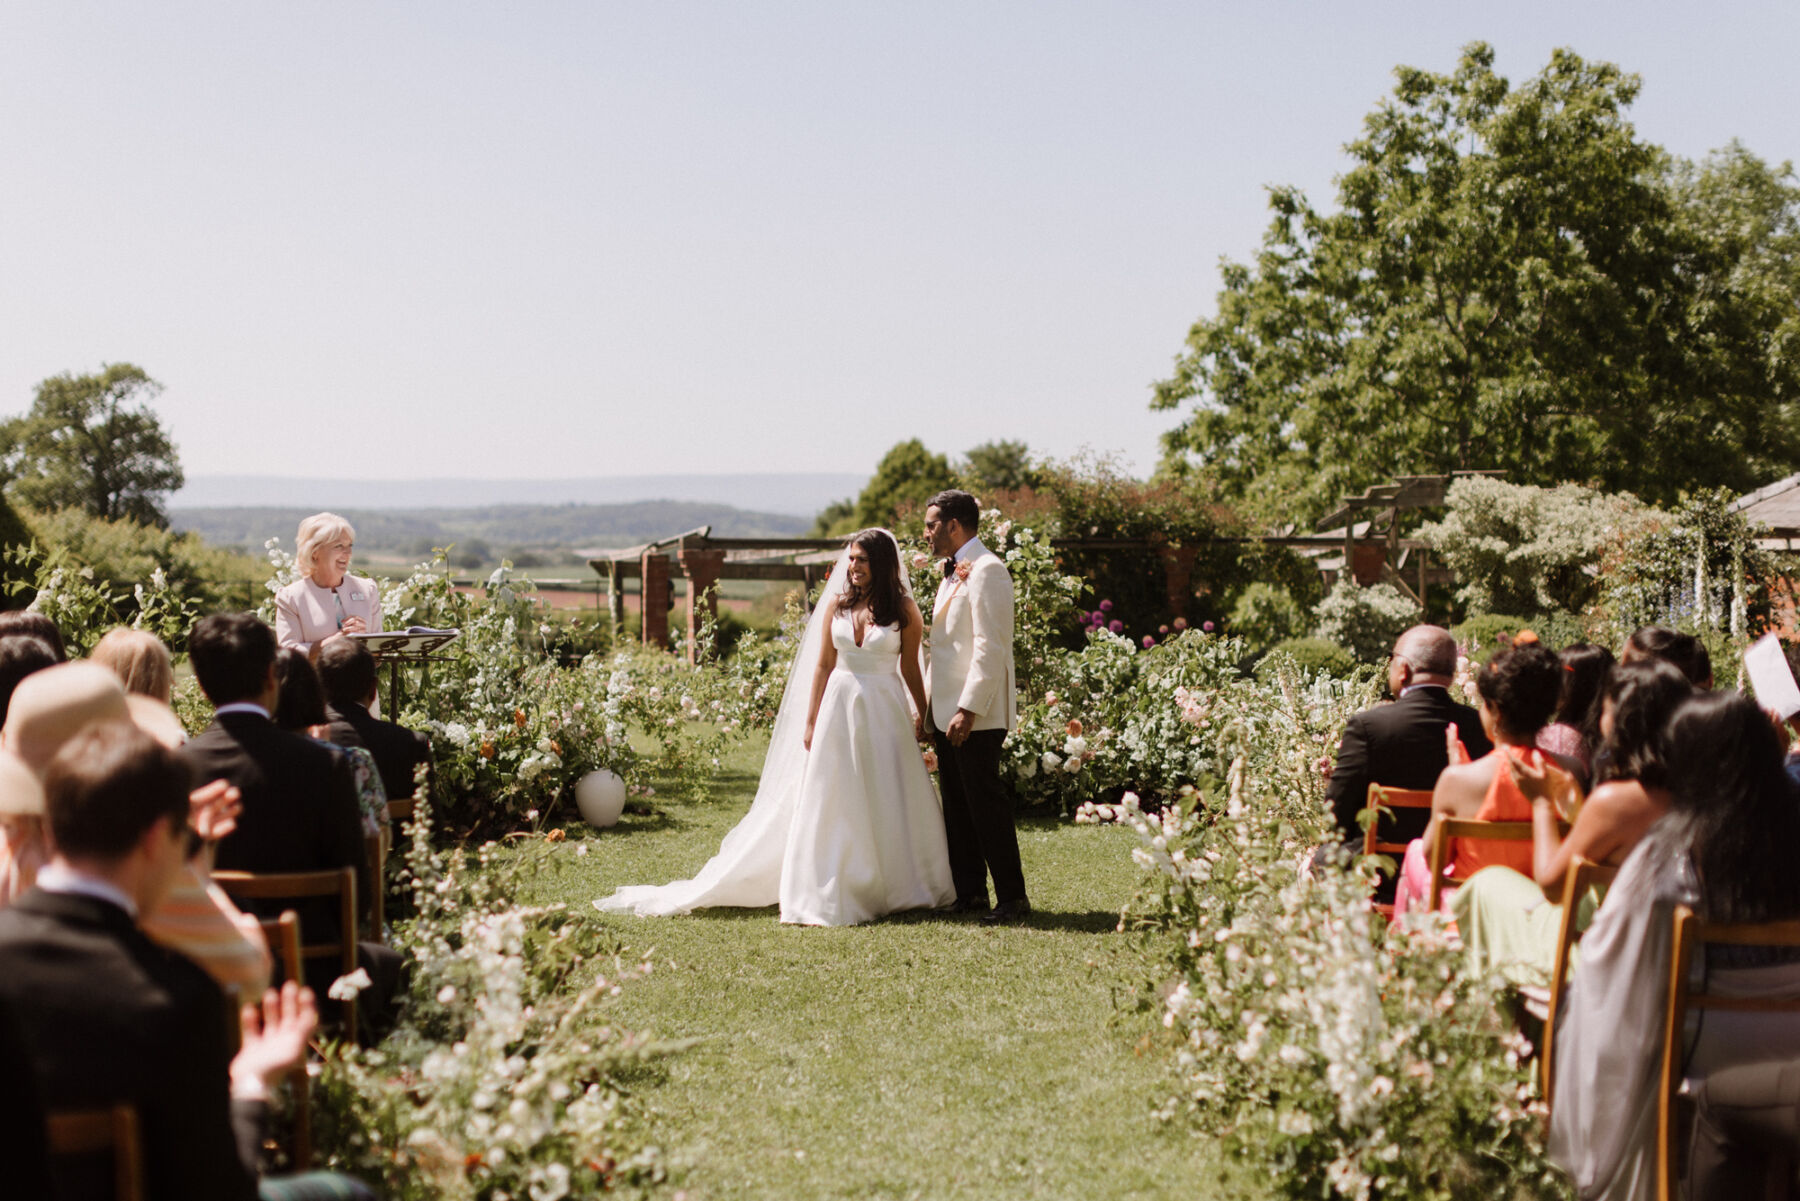 Outdoor wedding at Dewsall Court, country house wedding venue in Herefordshire